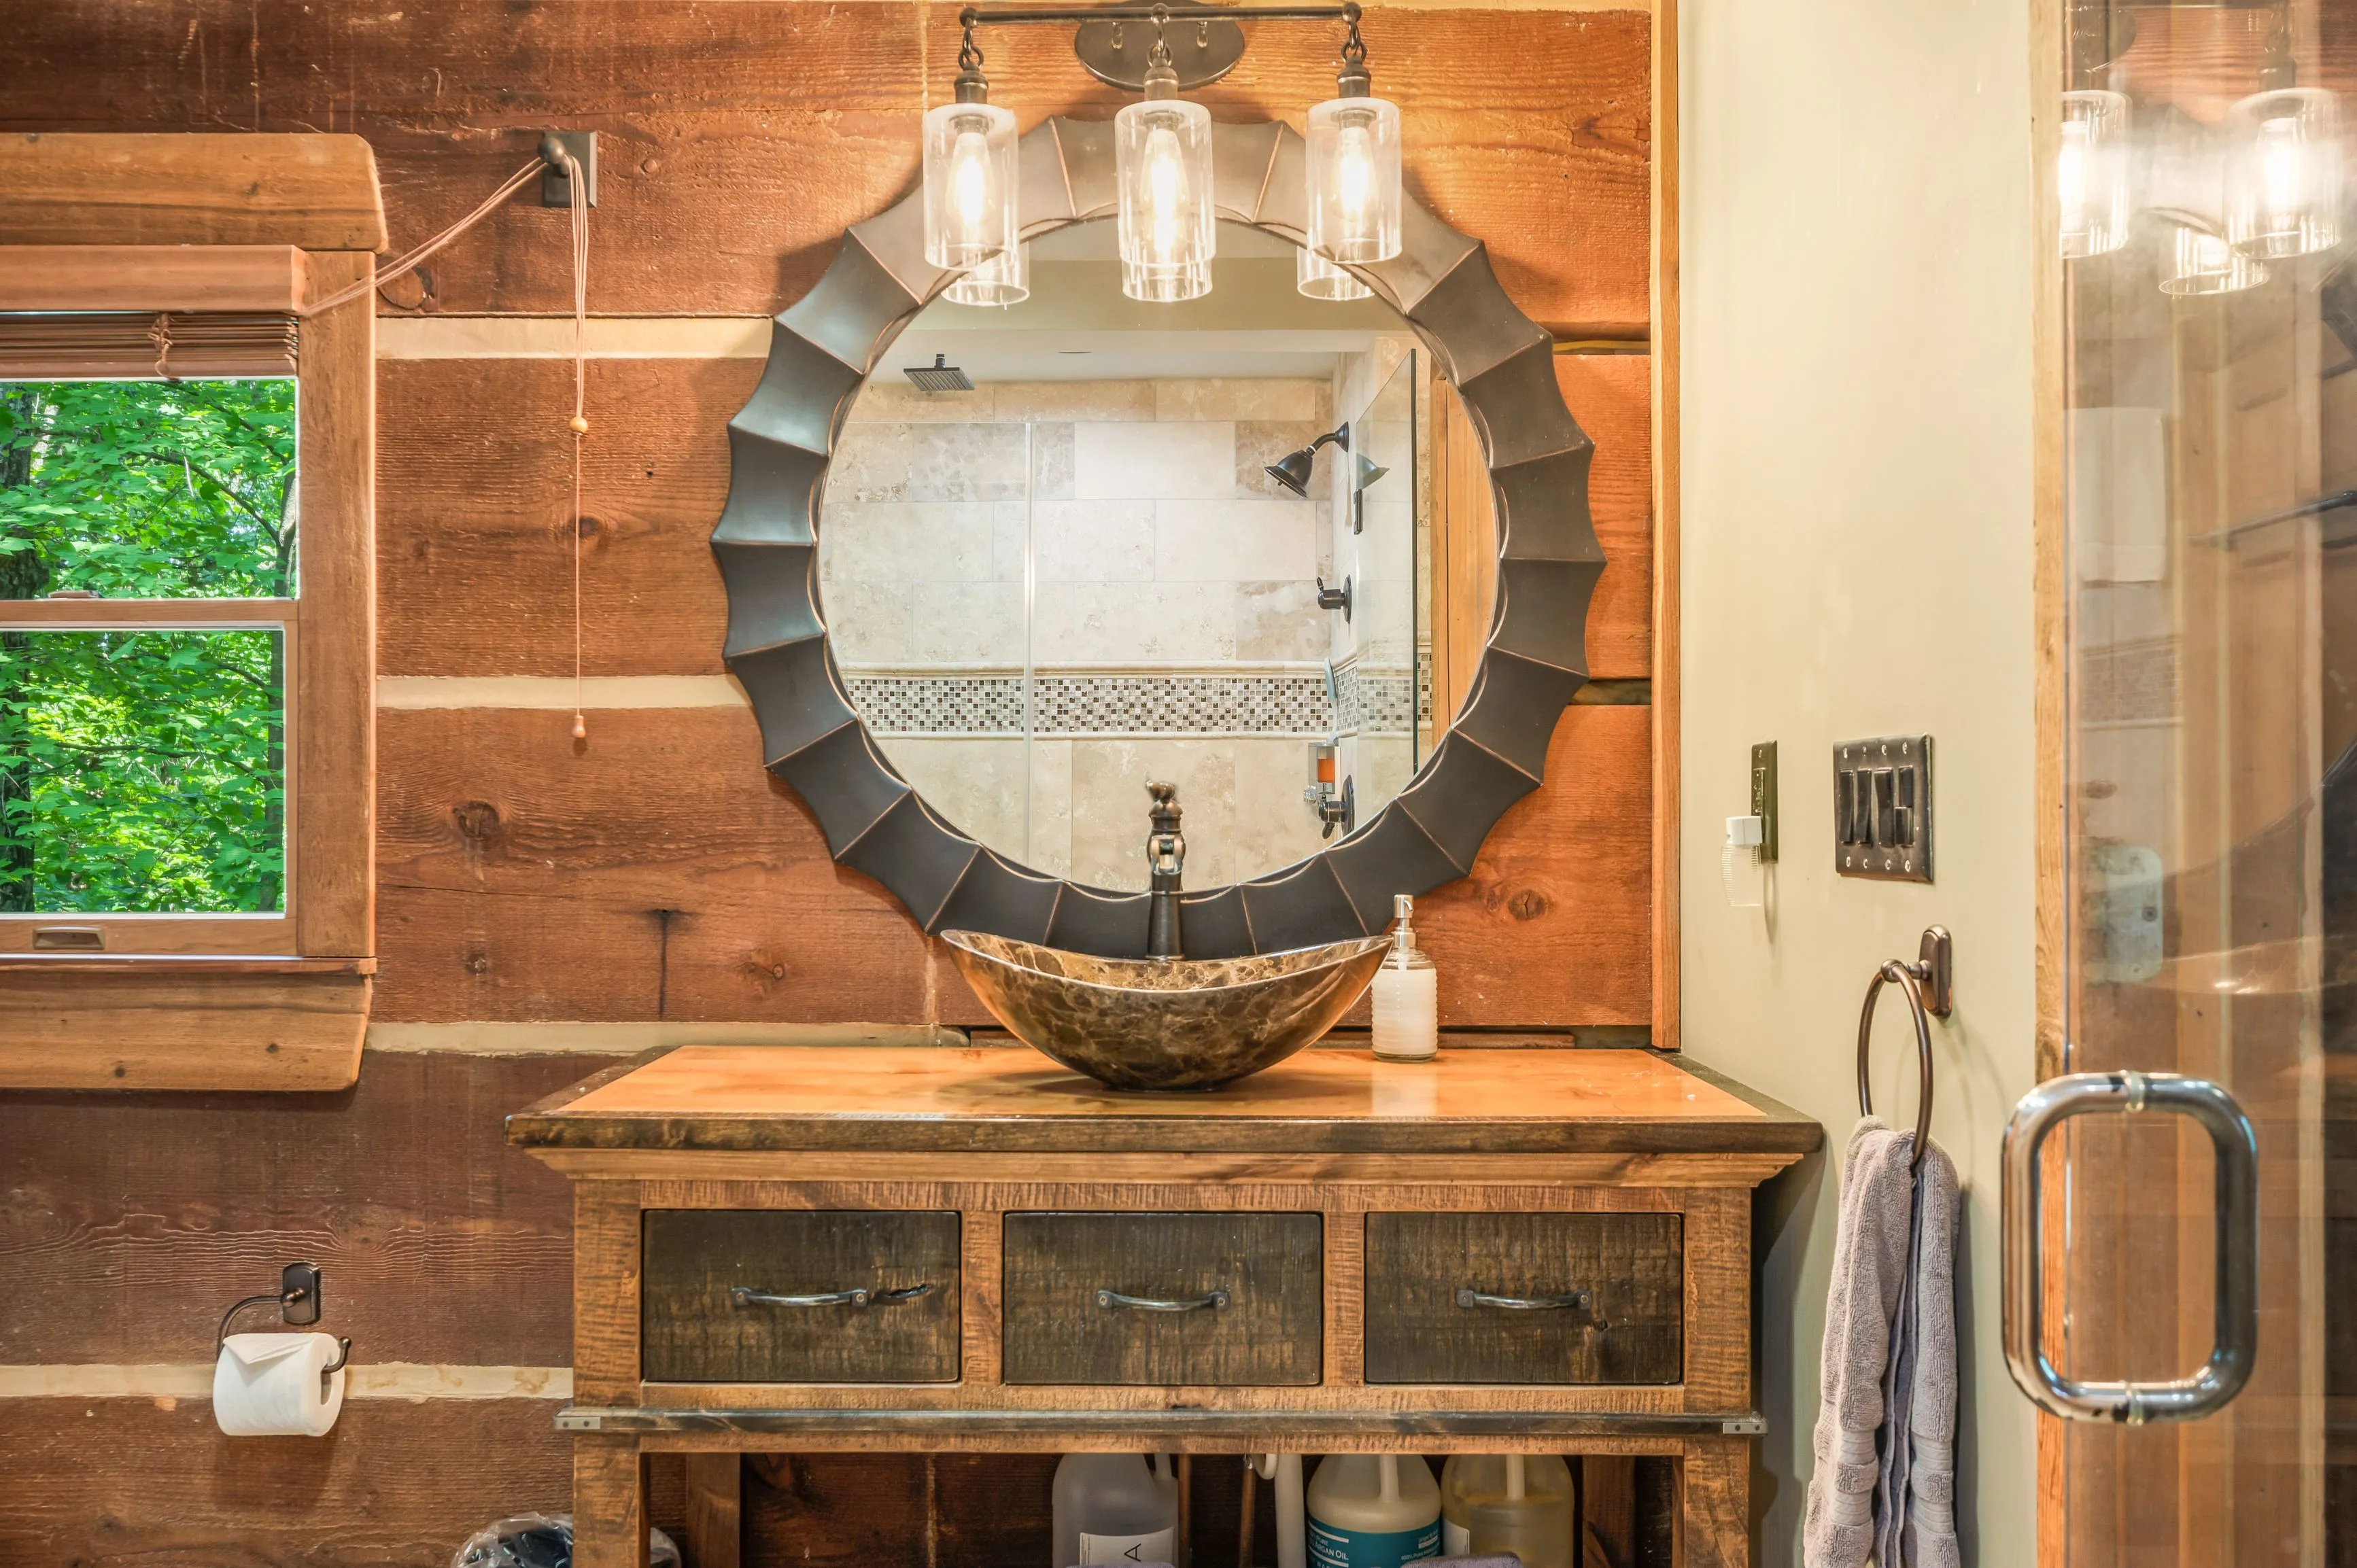 Rustic bathroom interior with wooden vanity, stone vessel sink, round mirror with industrial-style sconces, shower visible in mirror reflection, and natural light from a window.